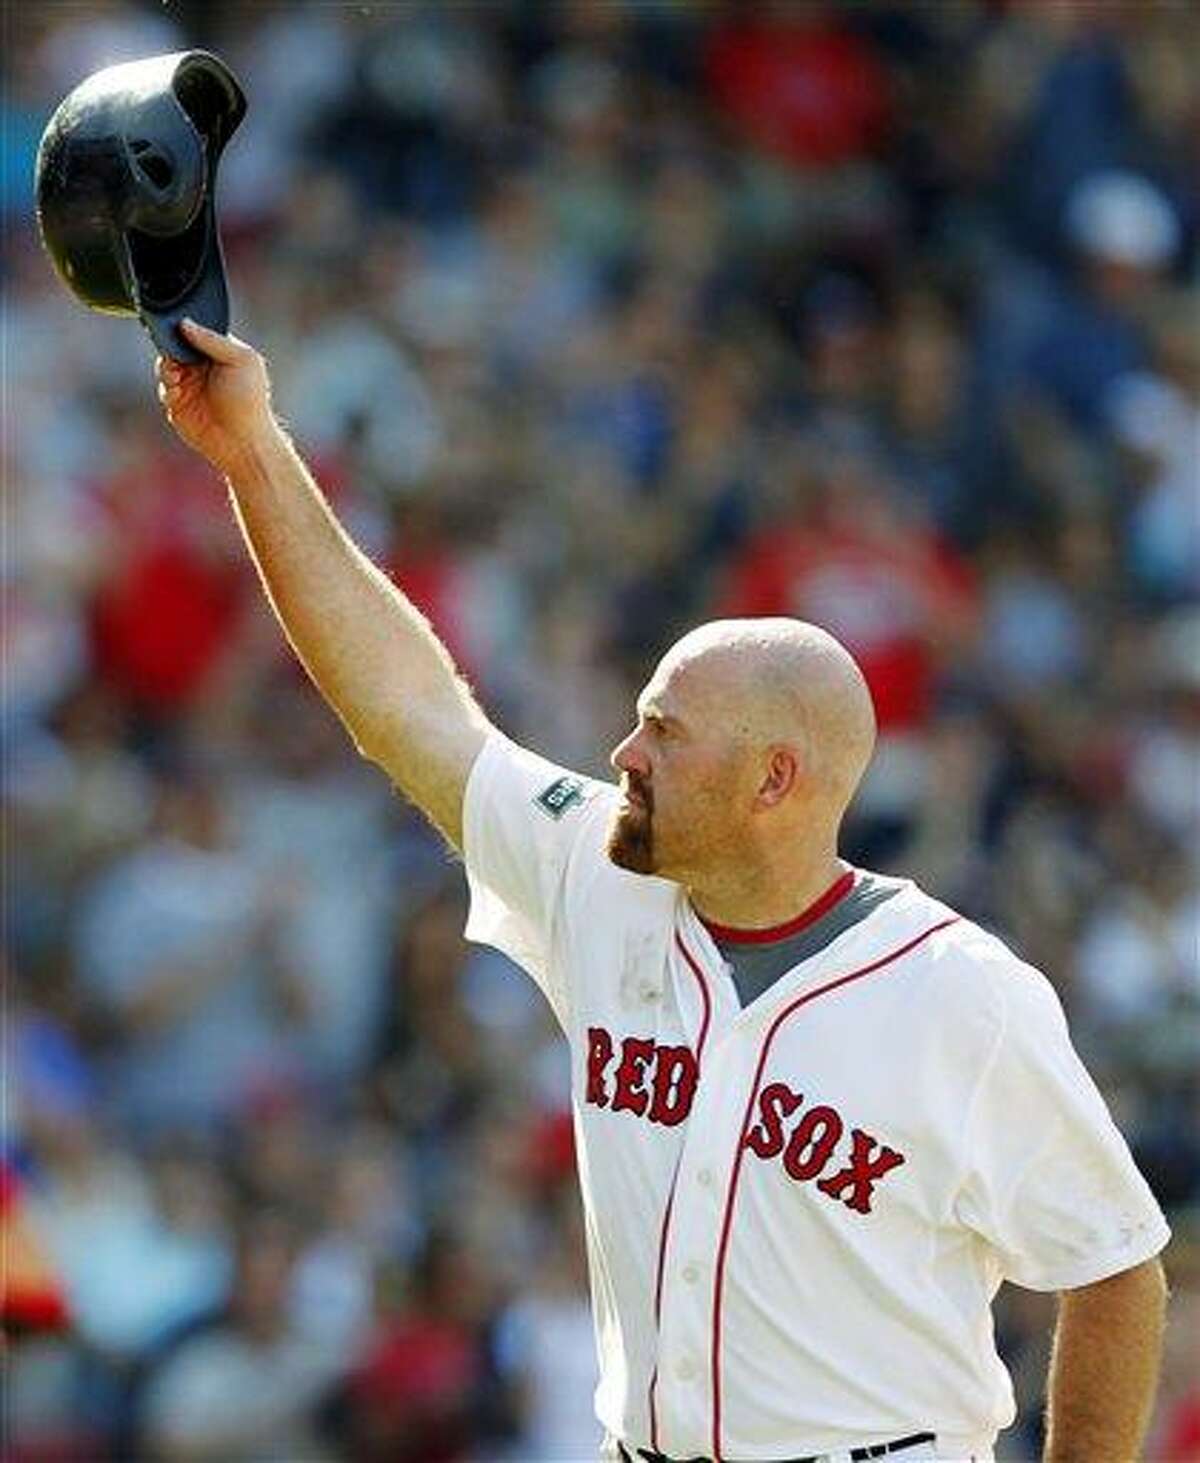 FILE - In this June 24, 2012, file photo, Boston Red Sox's Kevin Youkilis tips his helmet as he comes off the field after hitting a triple and being replaced with a pinch runner in the seventh inning of a baseball game against the Atlanta Braves in Boston. A person familiar with the negotiations told The Associated Press Tuesday, Dec. 11, that free agent Youkilis and the New York Yankees have reached agreement on a $12 million, one-year deal. (AP Photo/Michael Dwyer, File)